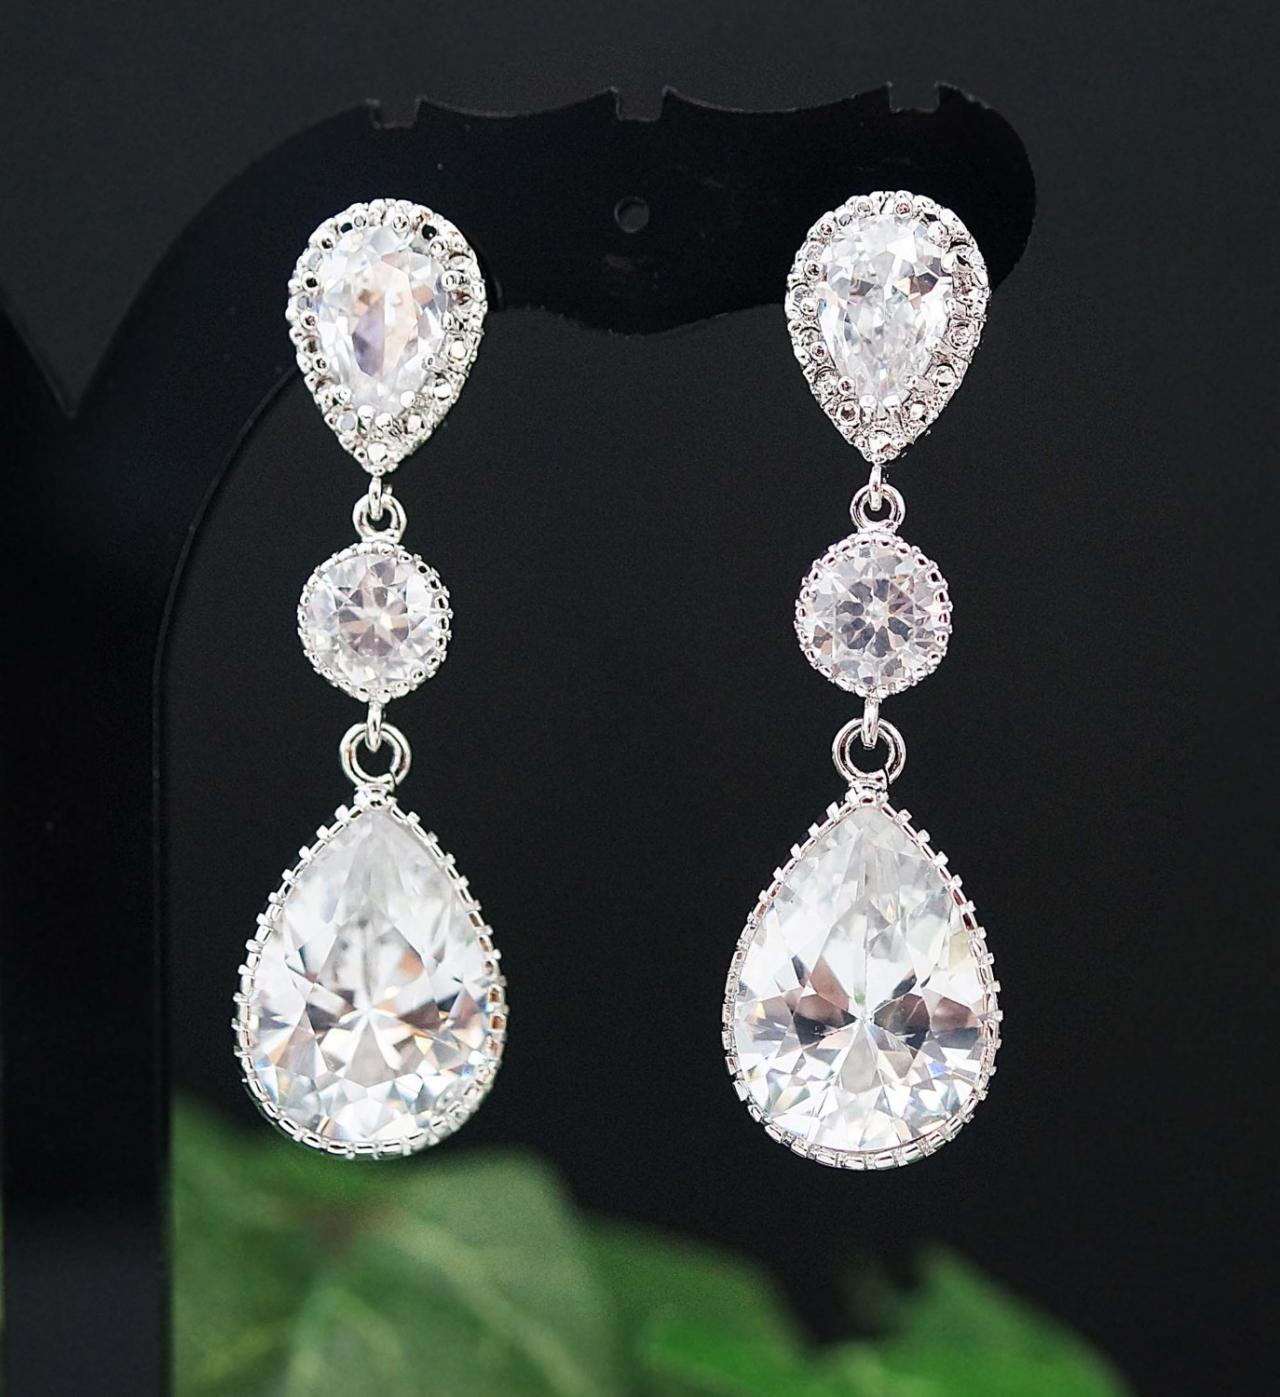 Wedding Bridal Jewelry Bridal Earrings Dangle Earrings Cubic Zirconia Connectors And Clear Large Cubic Zirconia Tear Drop Bridesmaid Gift